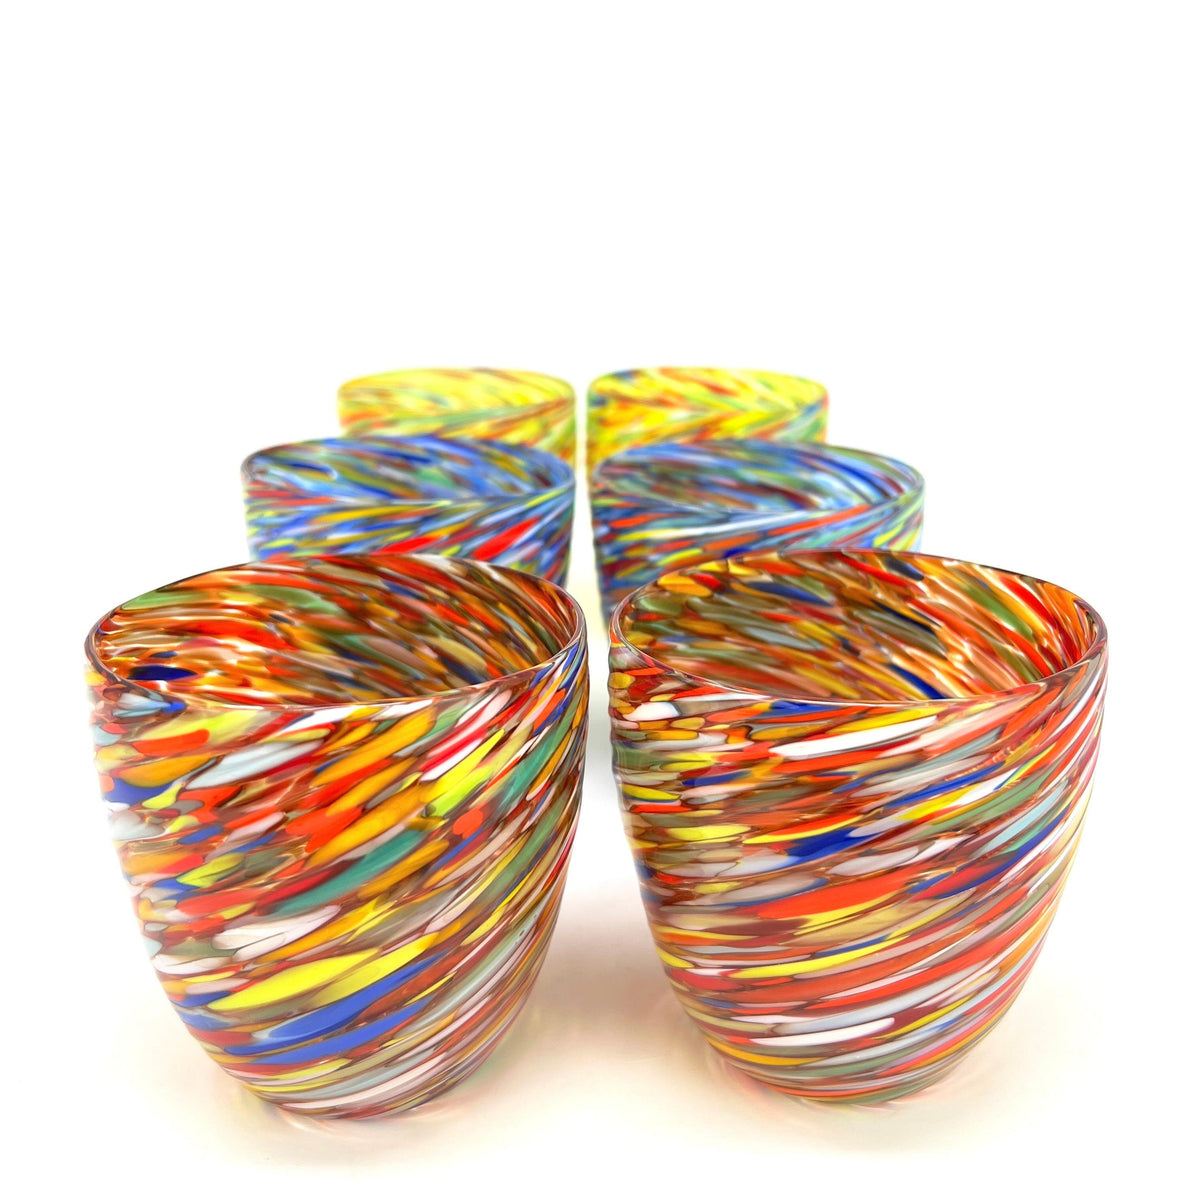 Twist Short Drinking Glasses, Multi-Colored, Made in Murano, Italy at MyItalianDecor